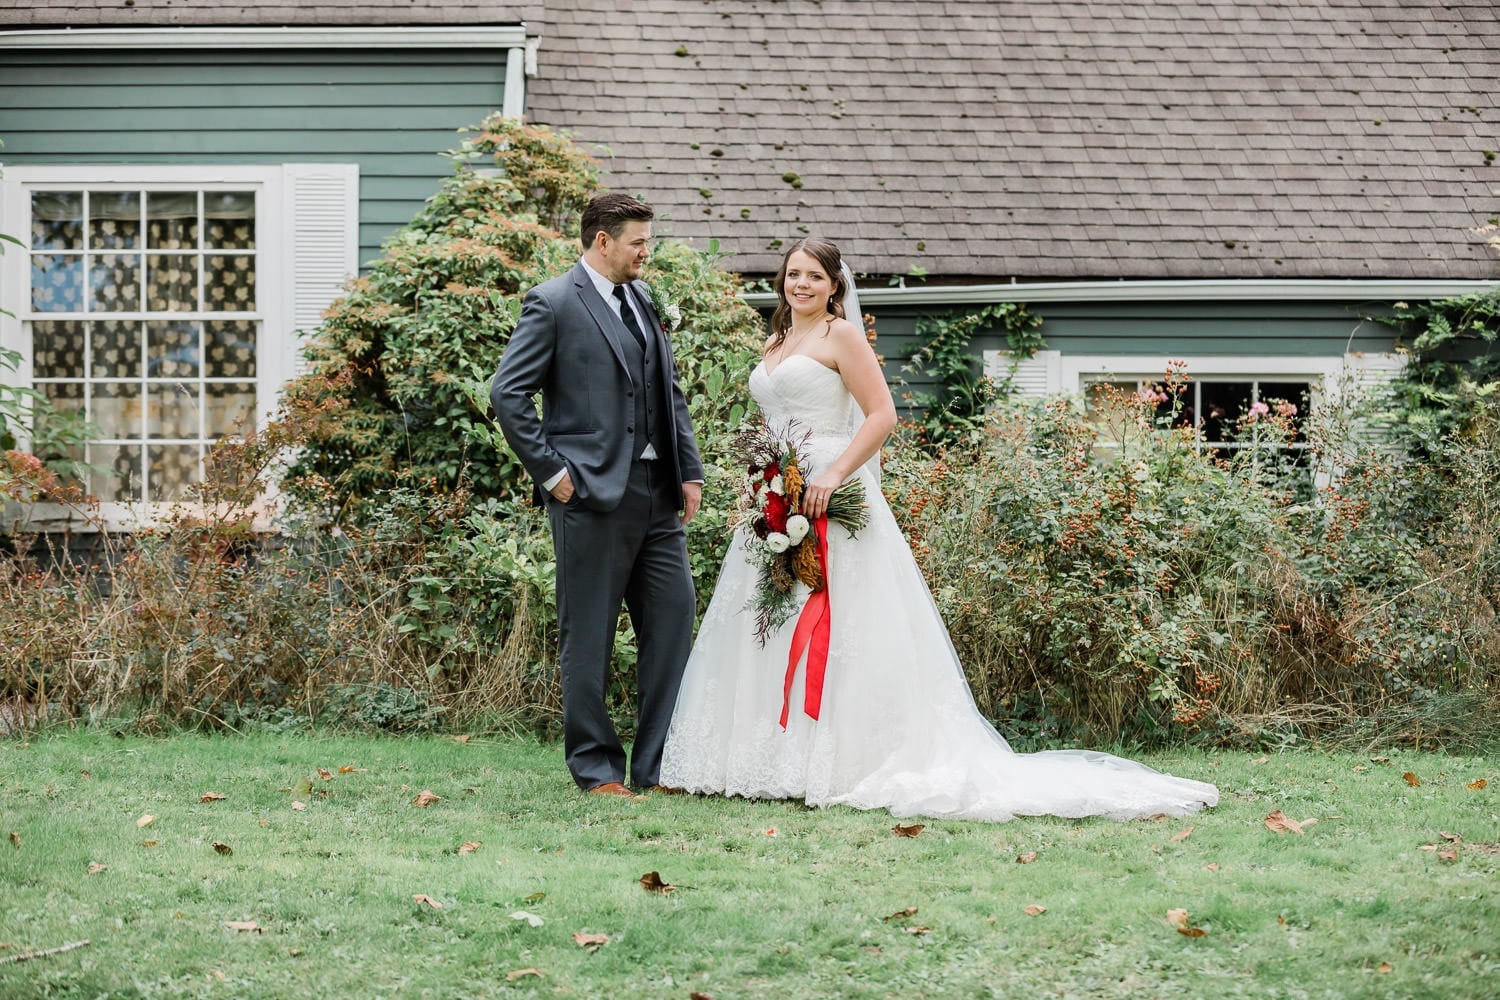 Rustic backyard wedding picture with bride and groom | Vancouver wedding photographer